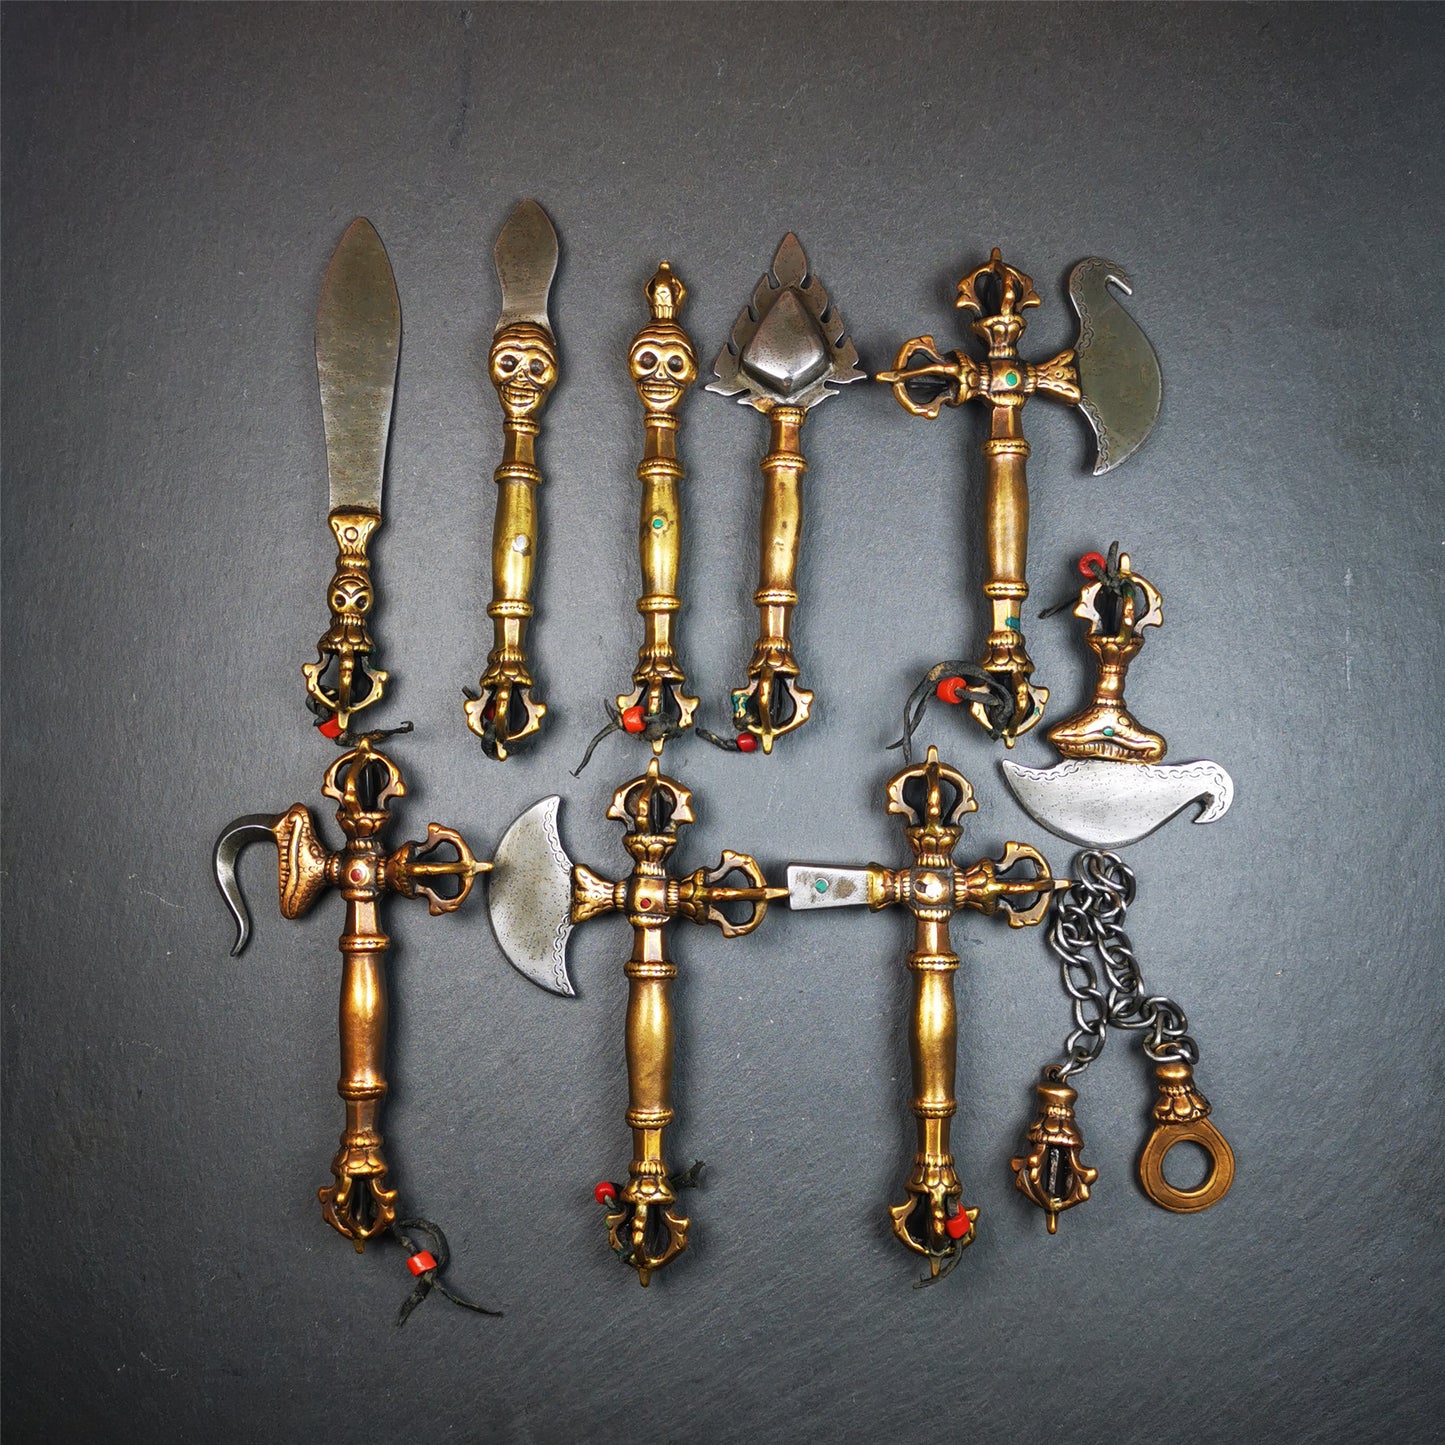 This set of Ritual Implements are handmade by Tibetan craftsmen from Tibet in 1980s,collected from derge parkhang monastery. They are made of copper,cold iron,total 10 pcs,include kila,kartika,hook,hammer,and other implements,please see the picture.